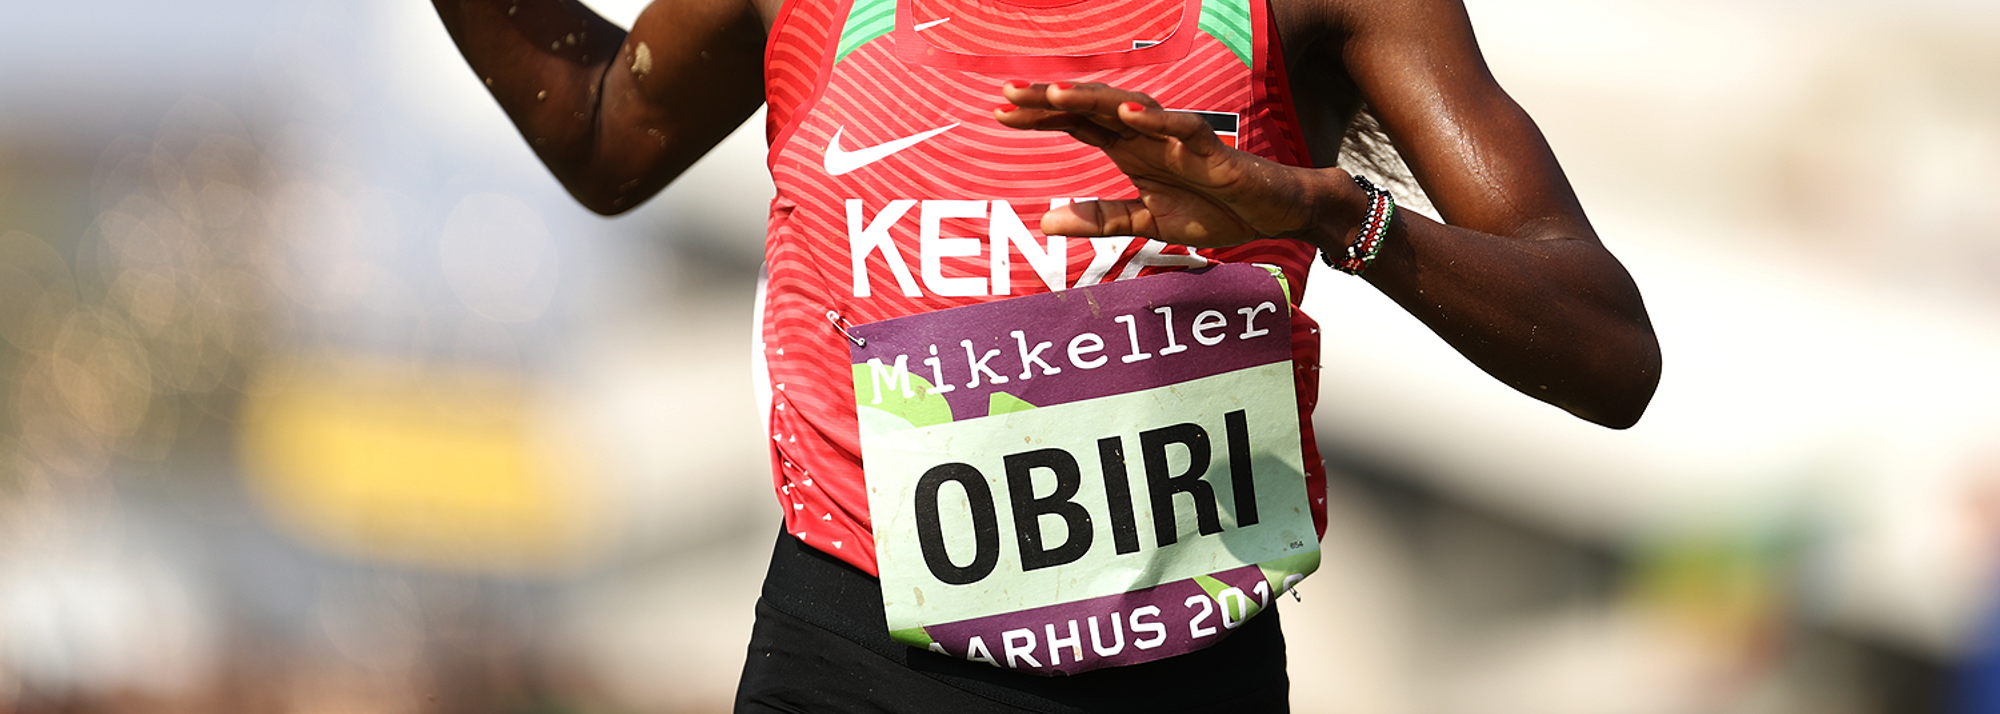 They may not have matched their unprecedented top-six sweep from 2017, but Hellen Obiri ensured the senior women’s crown stayed with Kenya, winning at the IAAF/Mikkeller World Cross Country Championships Aarhus 2019.